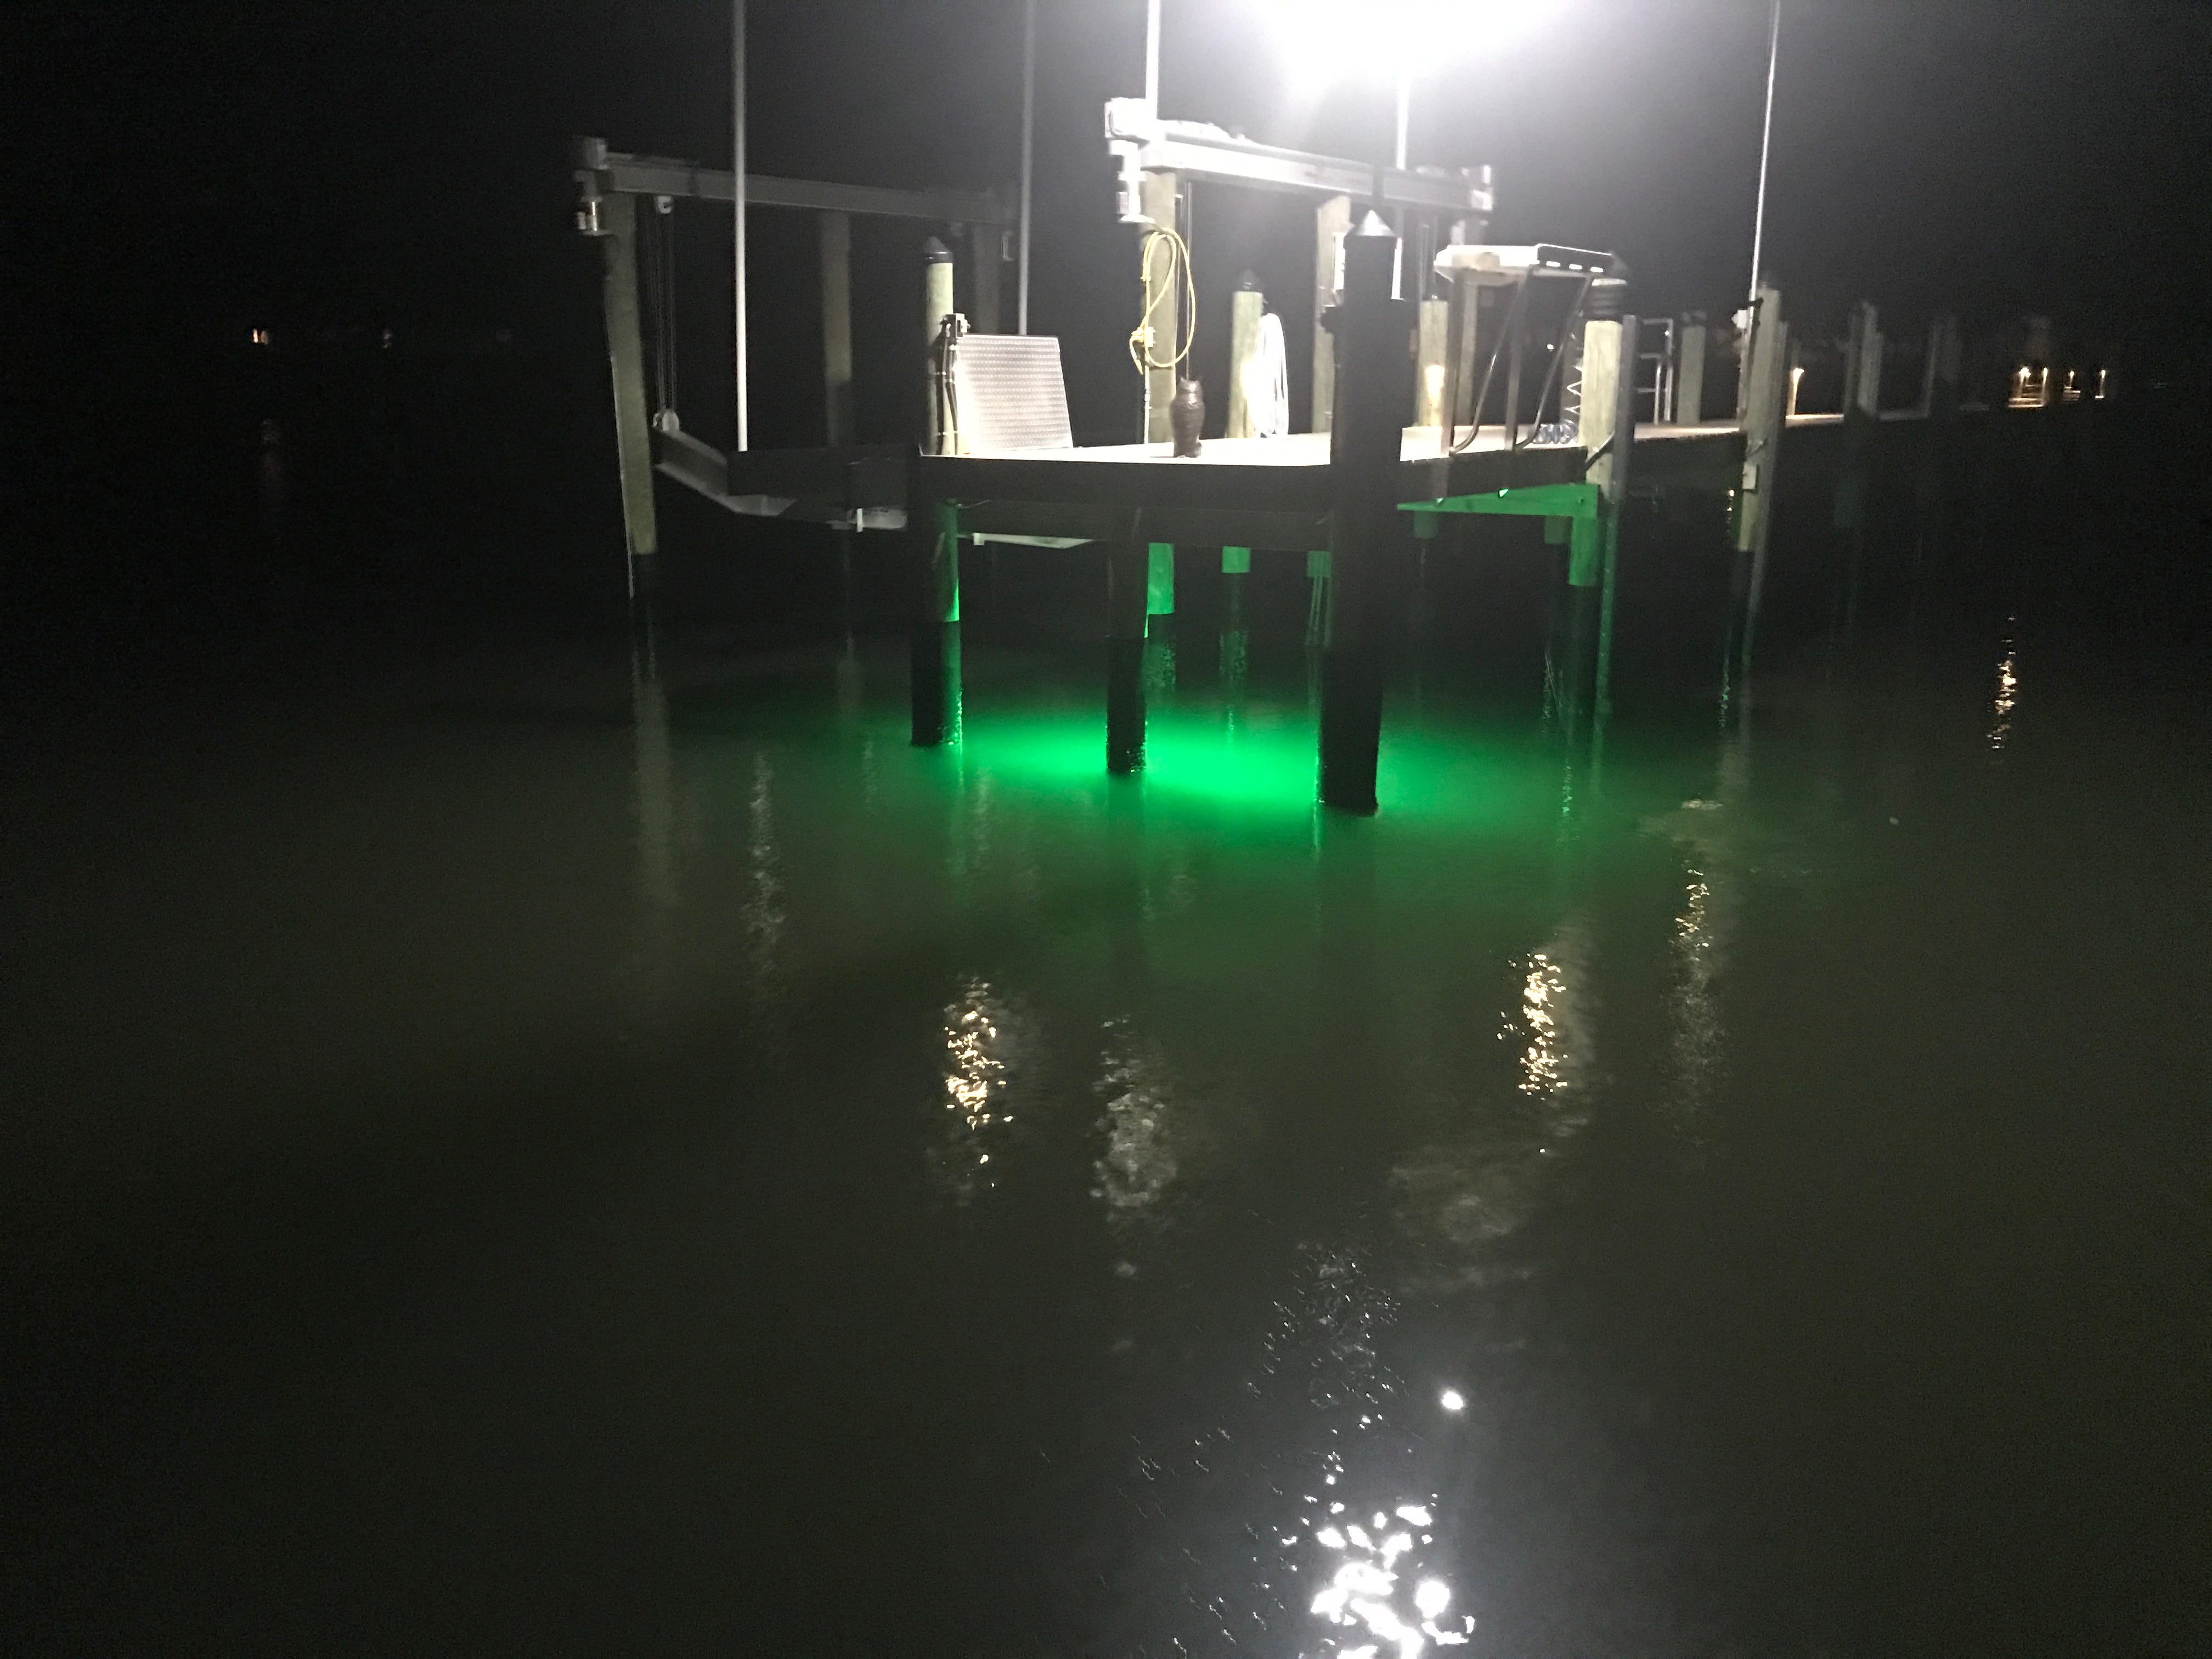 Blog] Snooking Around the Dock Lights - by Graves Fromang